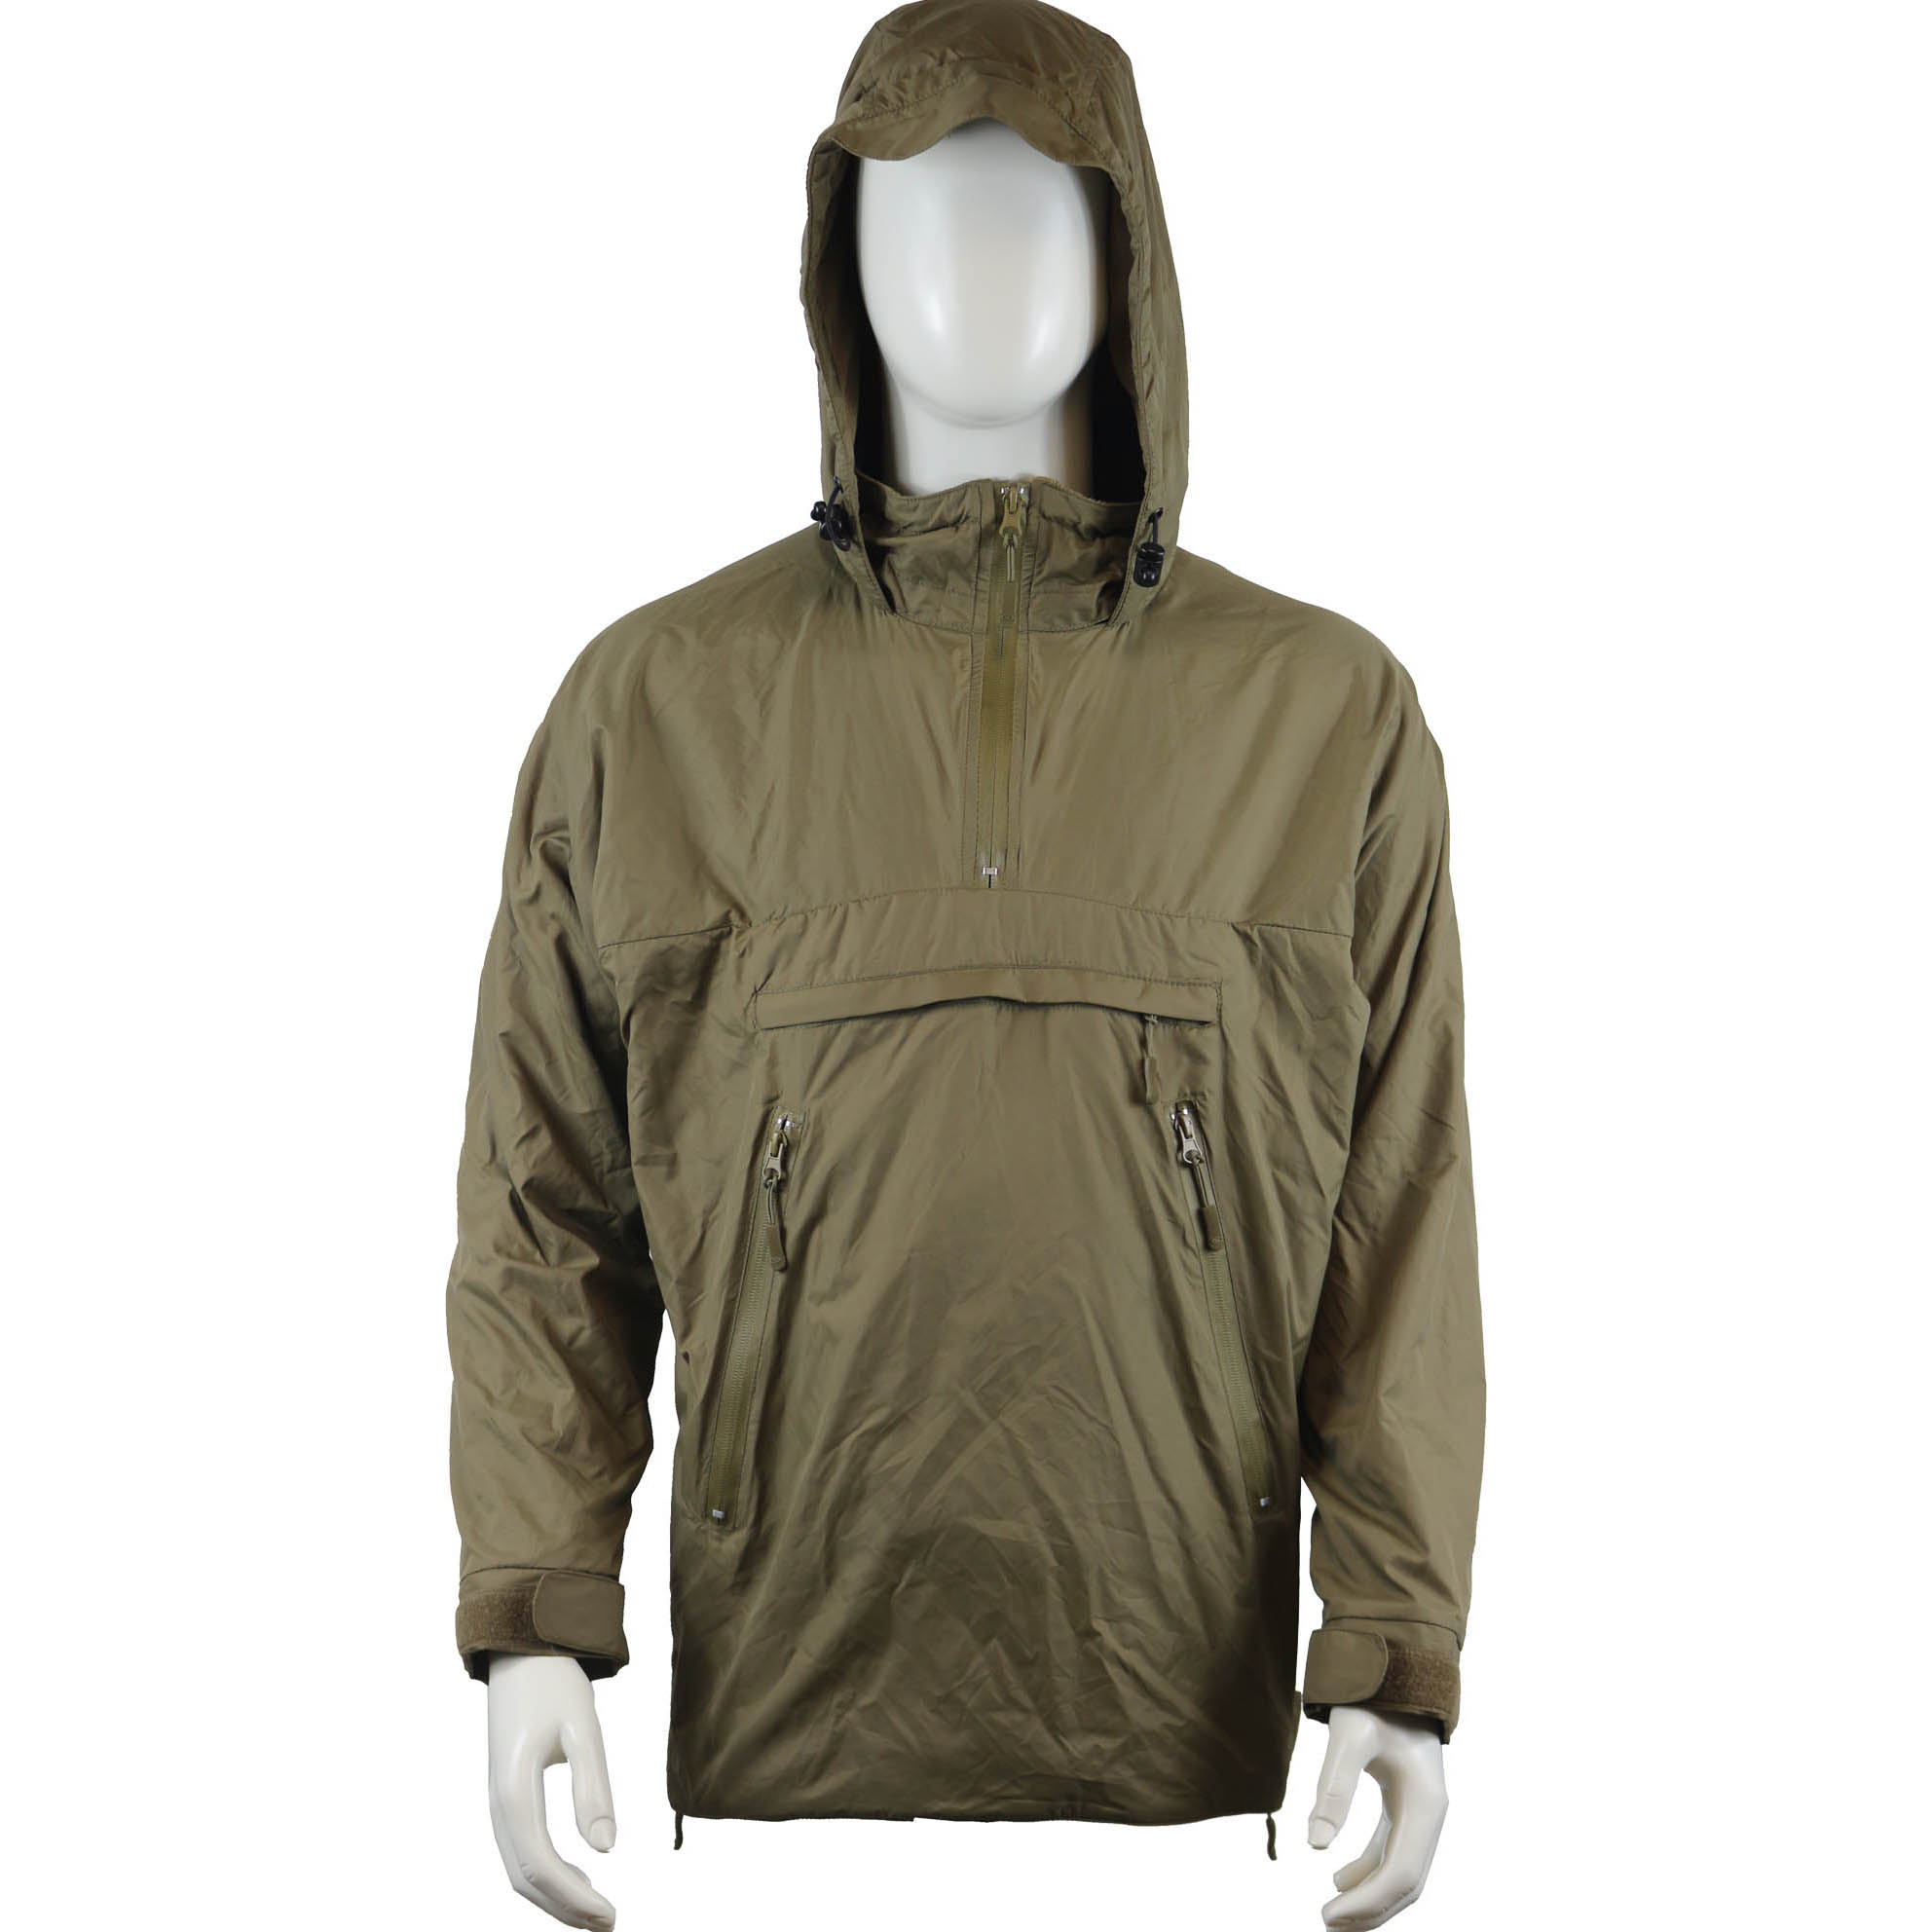 Og Army Softshell Jacket Waterproof and Breathable - Buy Tactical ...